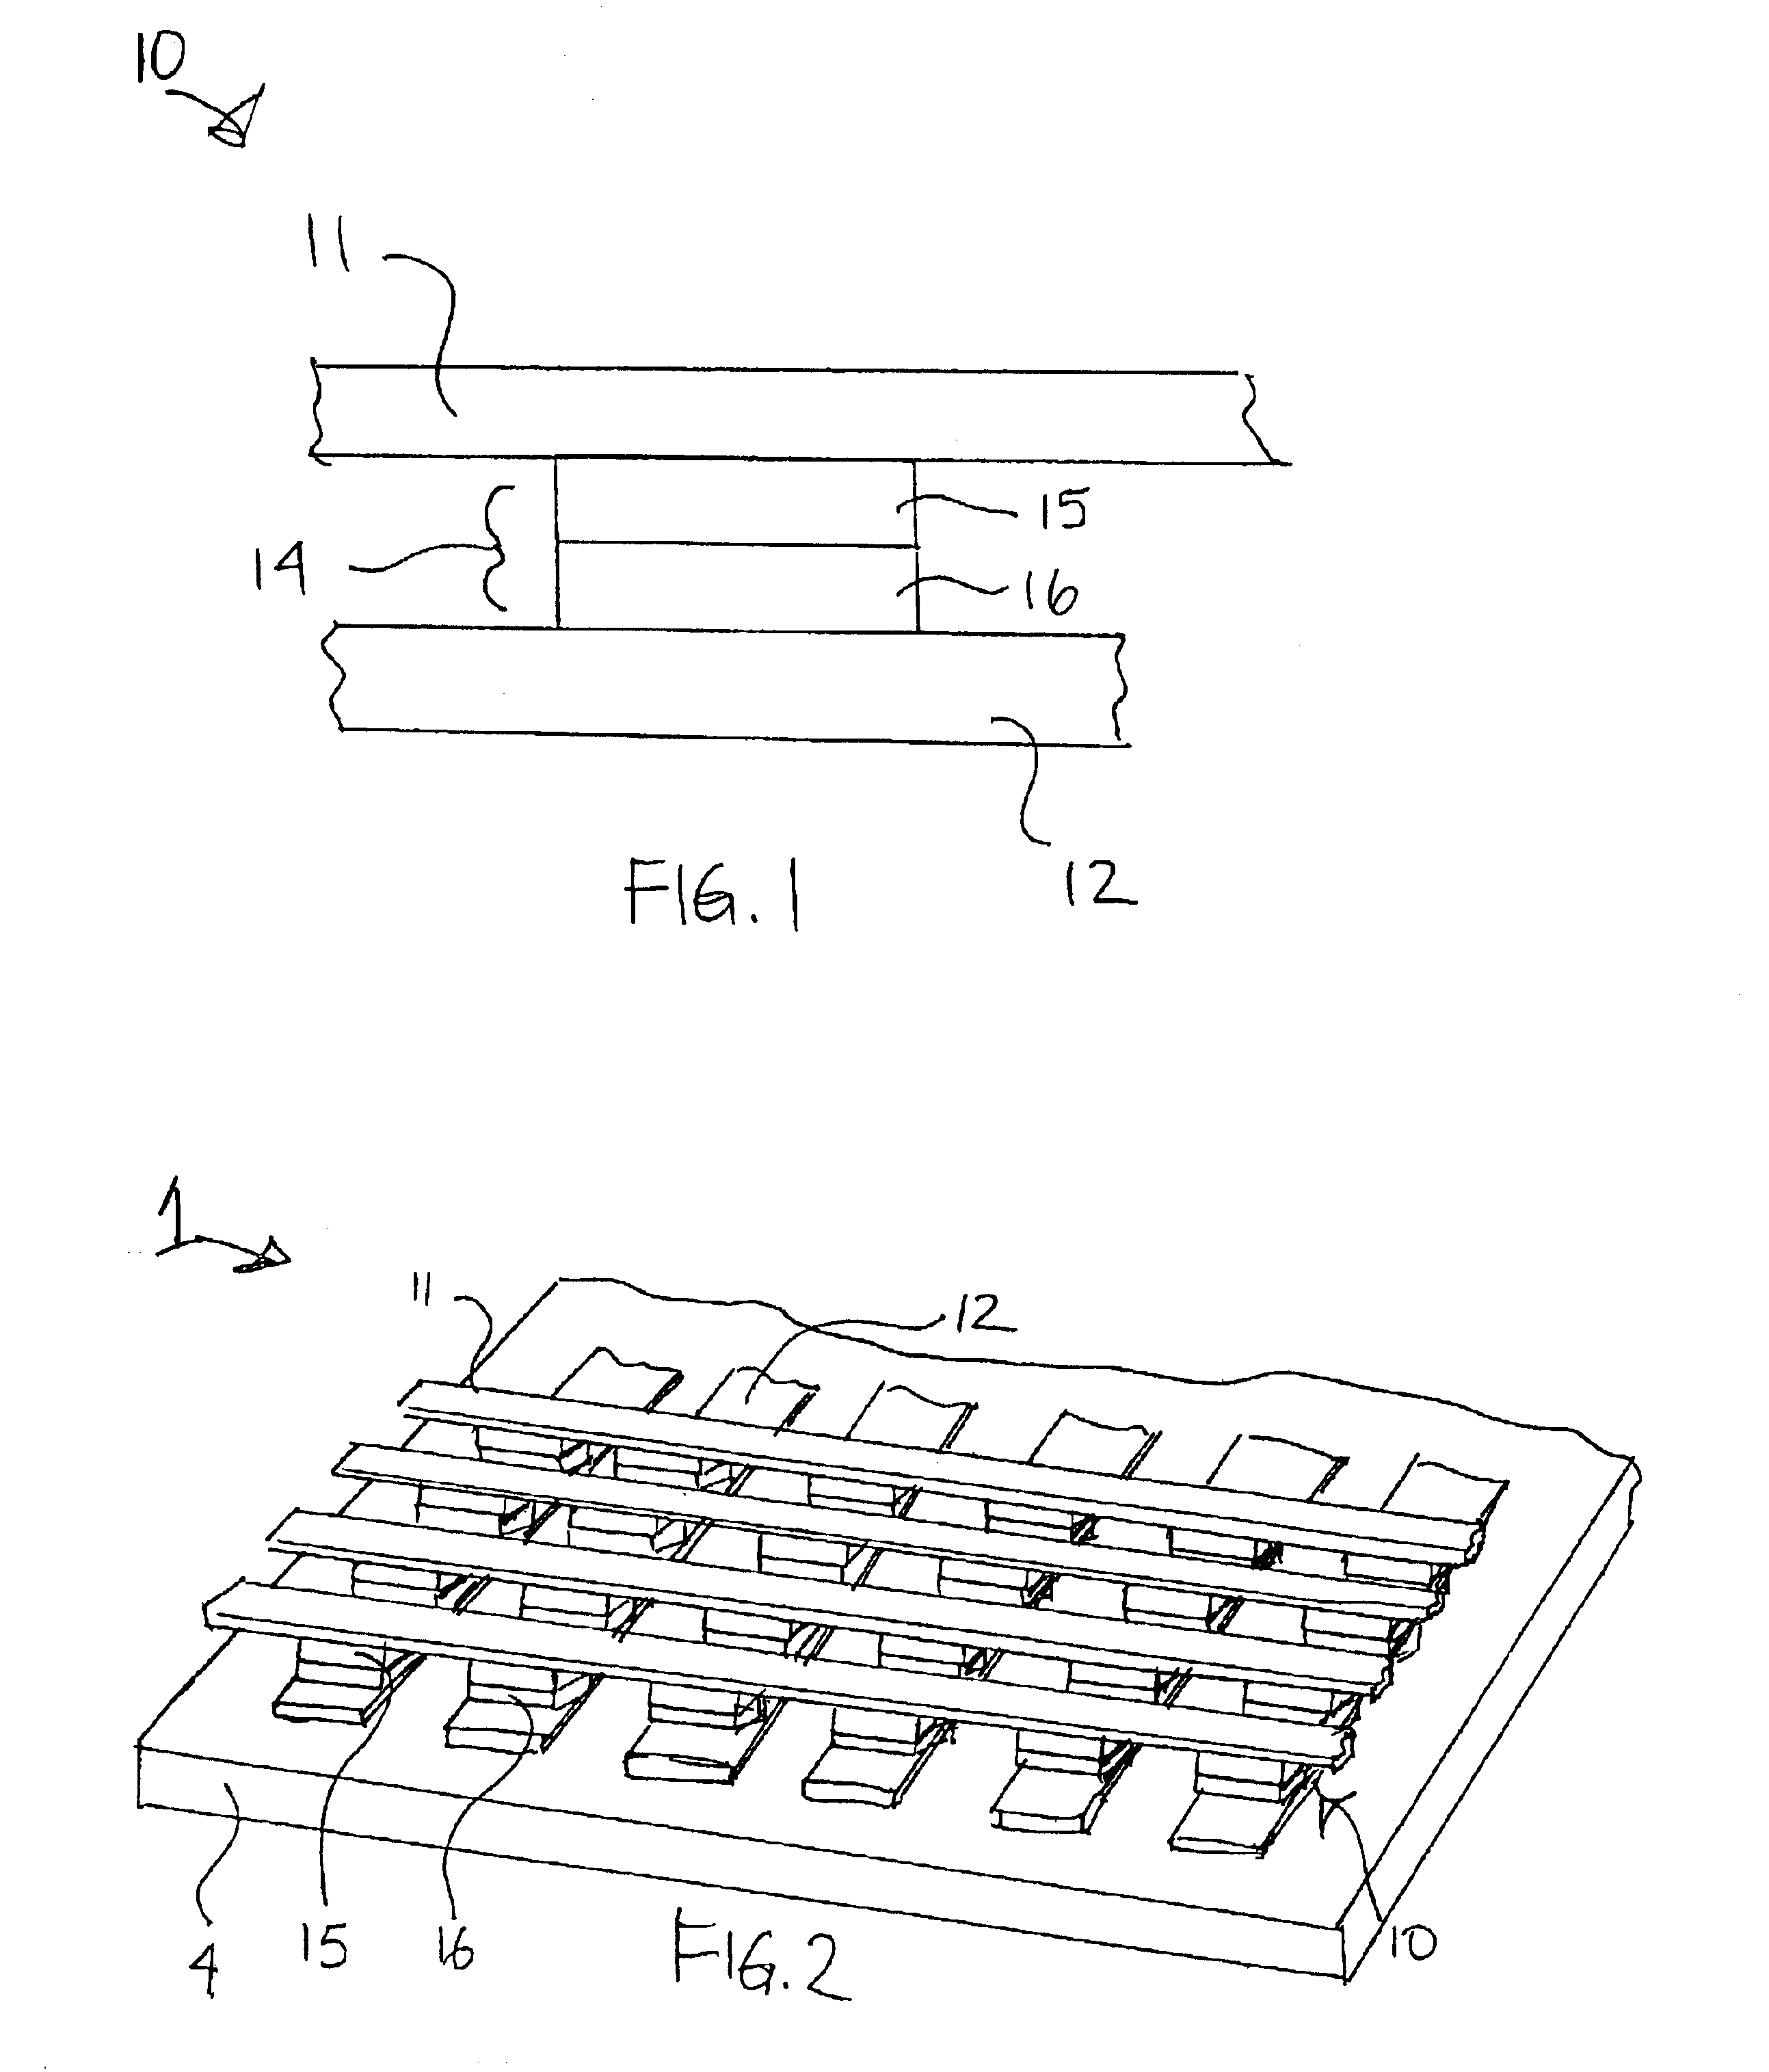 Memory device with active and passive layers